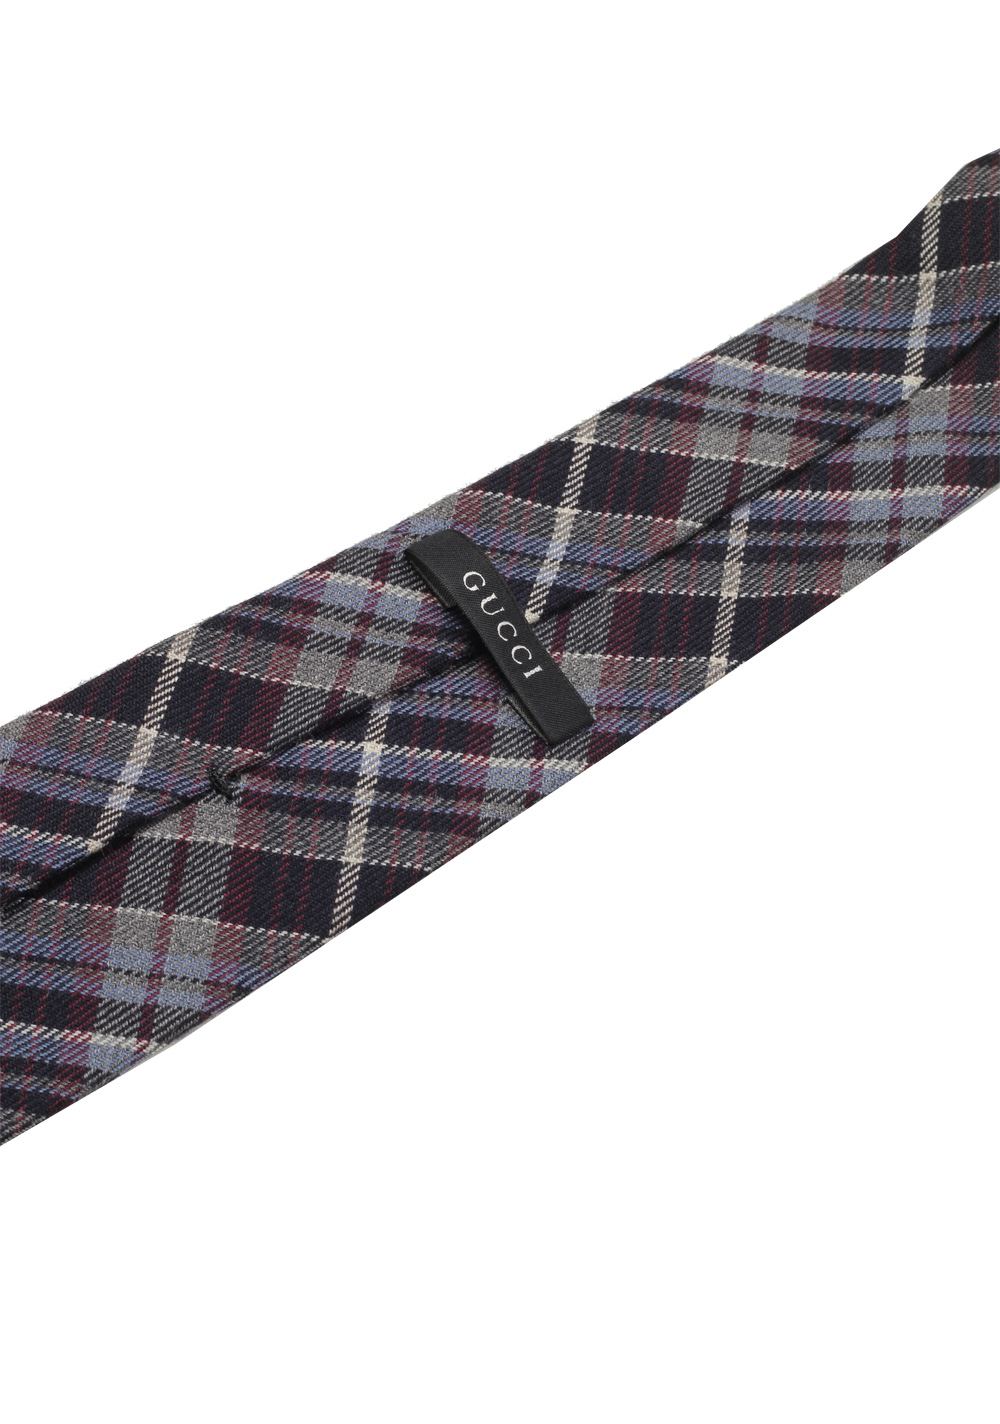 Gucci Multi Colored Patterned Checked Tie | Costume Limité